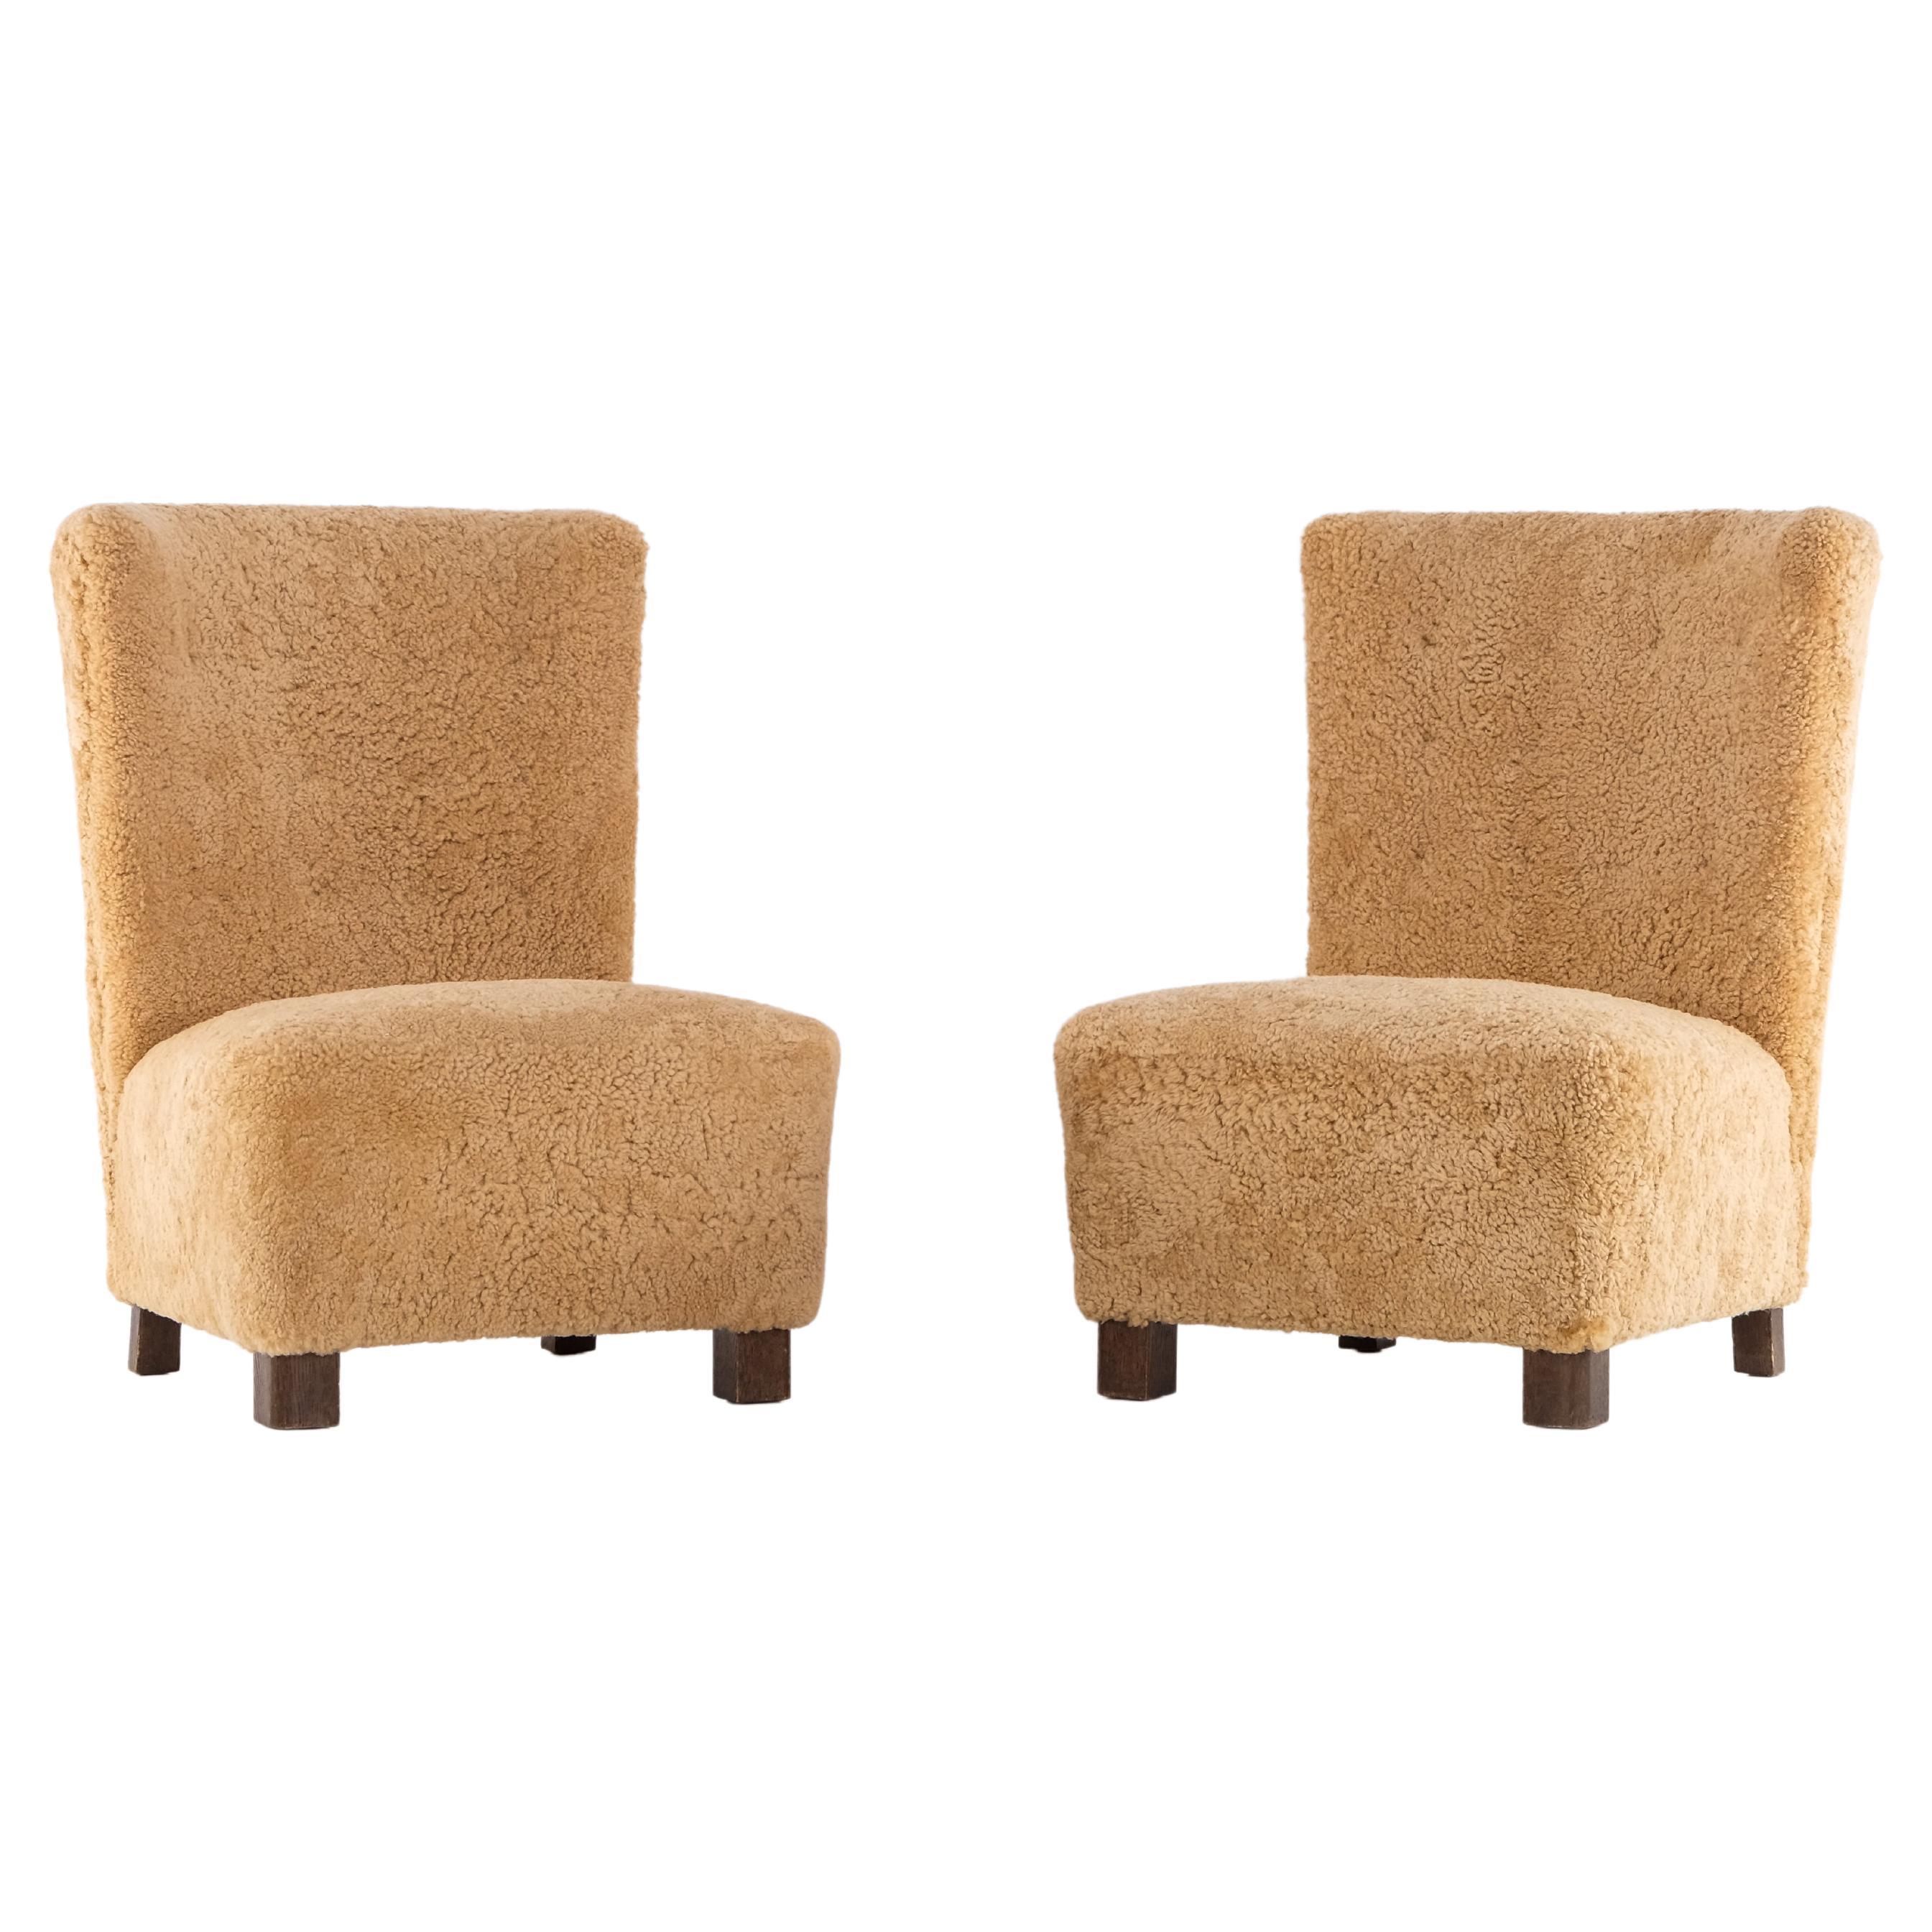 Pair Swedish Modern Easy Chairs, 1940s For Sale